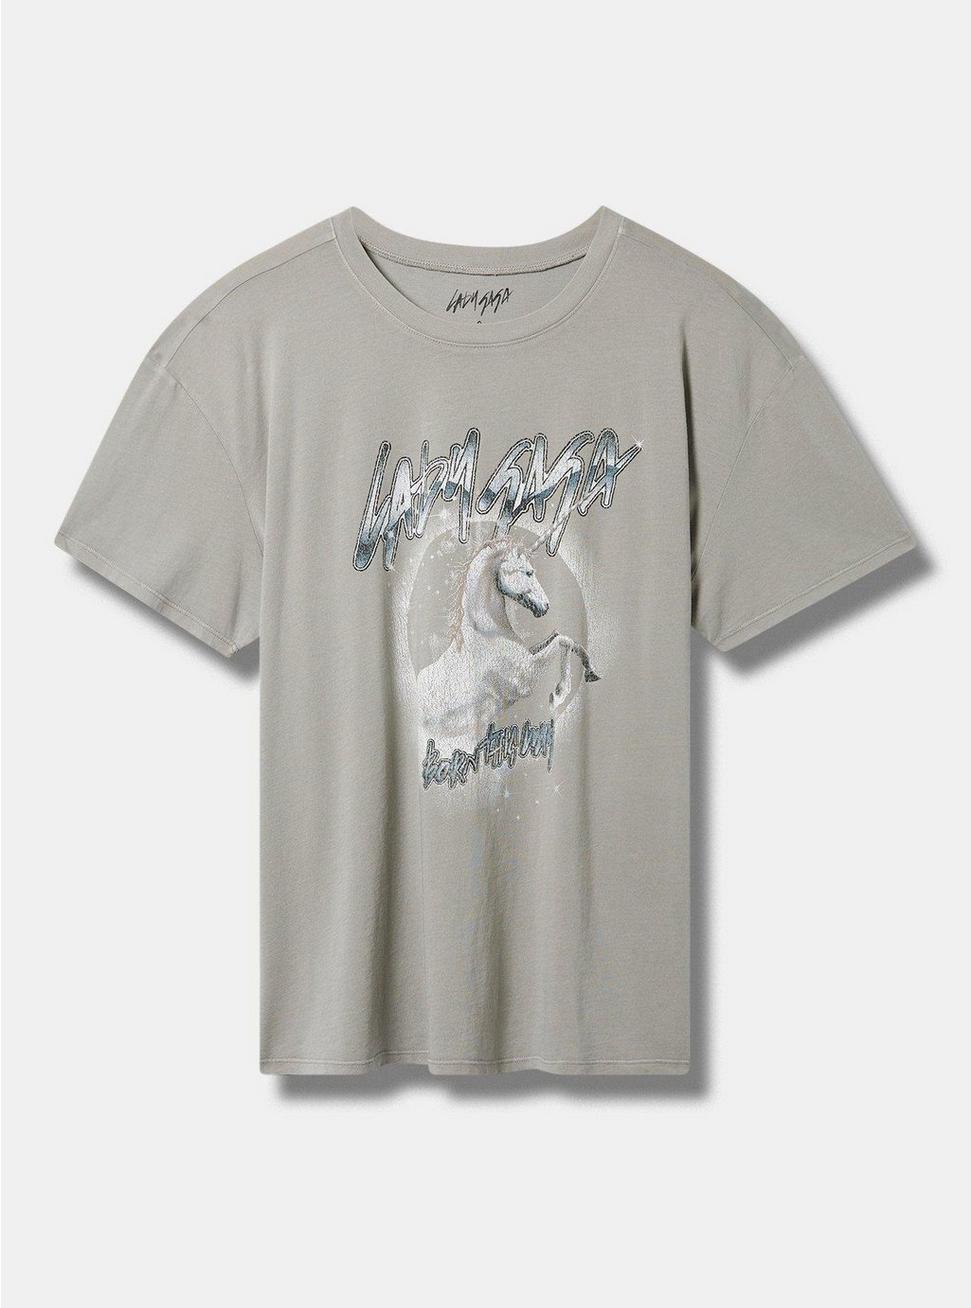 Lady Gaga Relaxed Fit Cotton Boxy Tee, GREY, hi-res